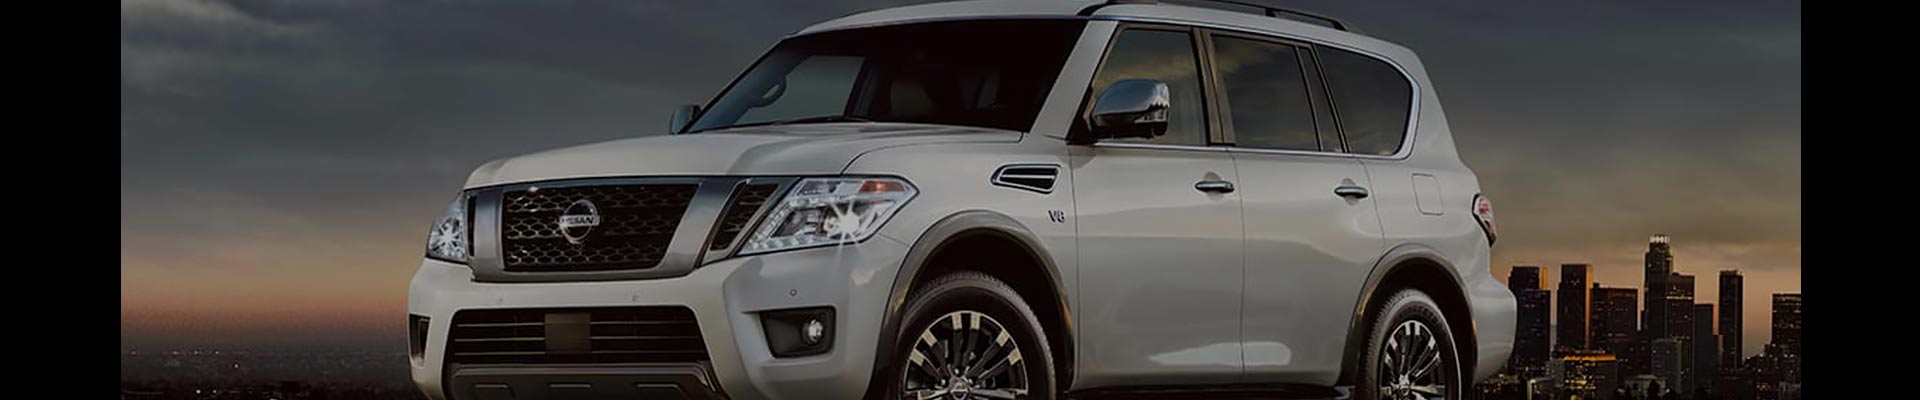 Shop Replacement and OEM 2007 Nissan Armada Parts with Discounted Price on the Net